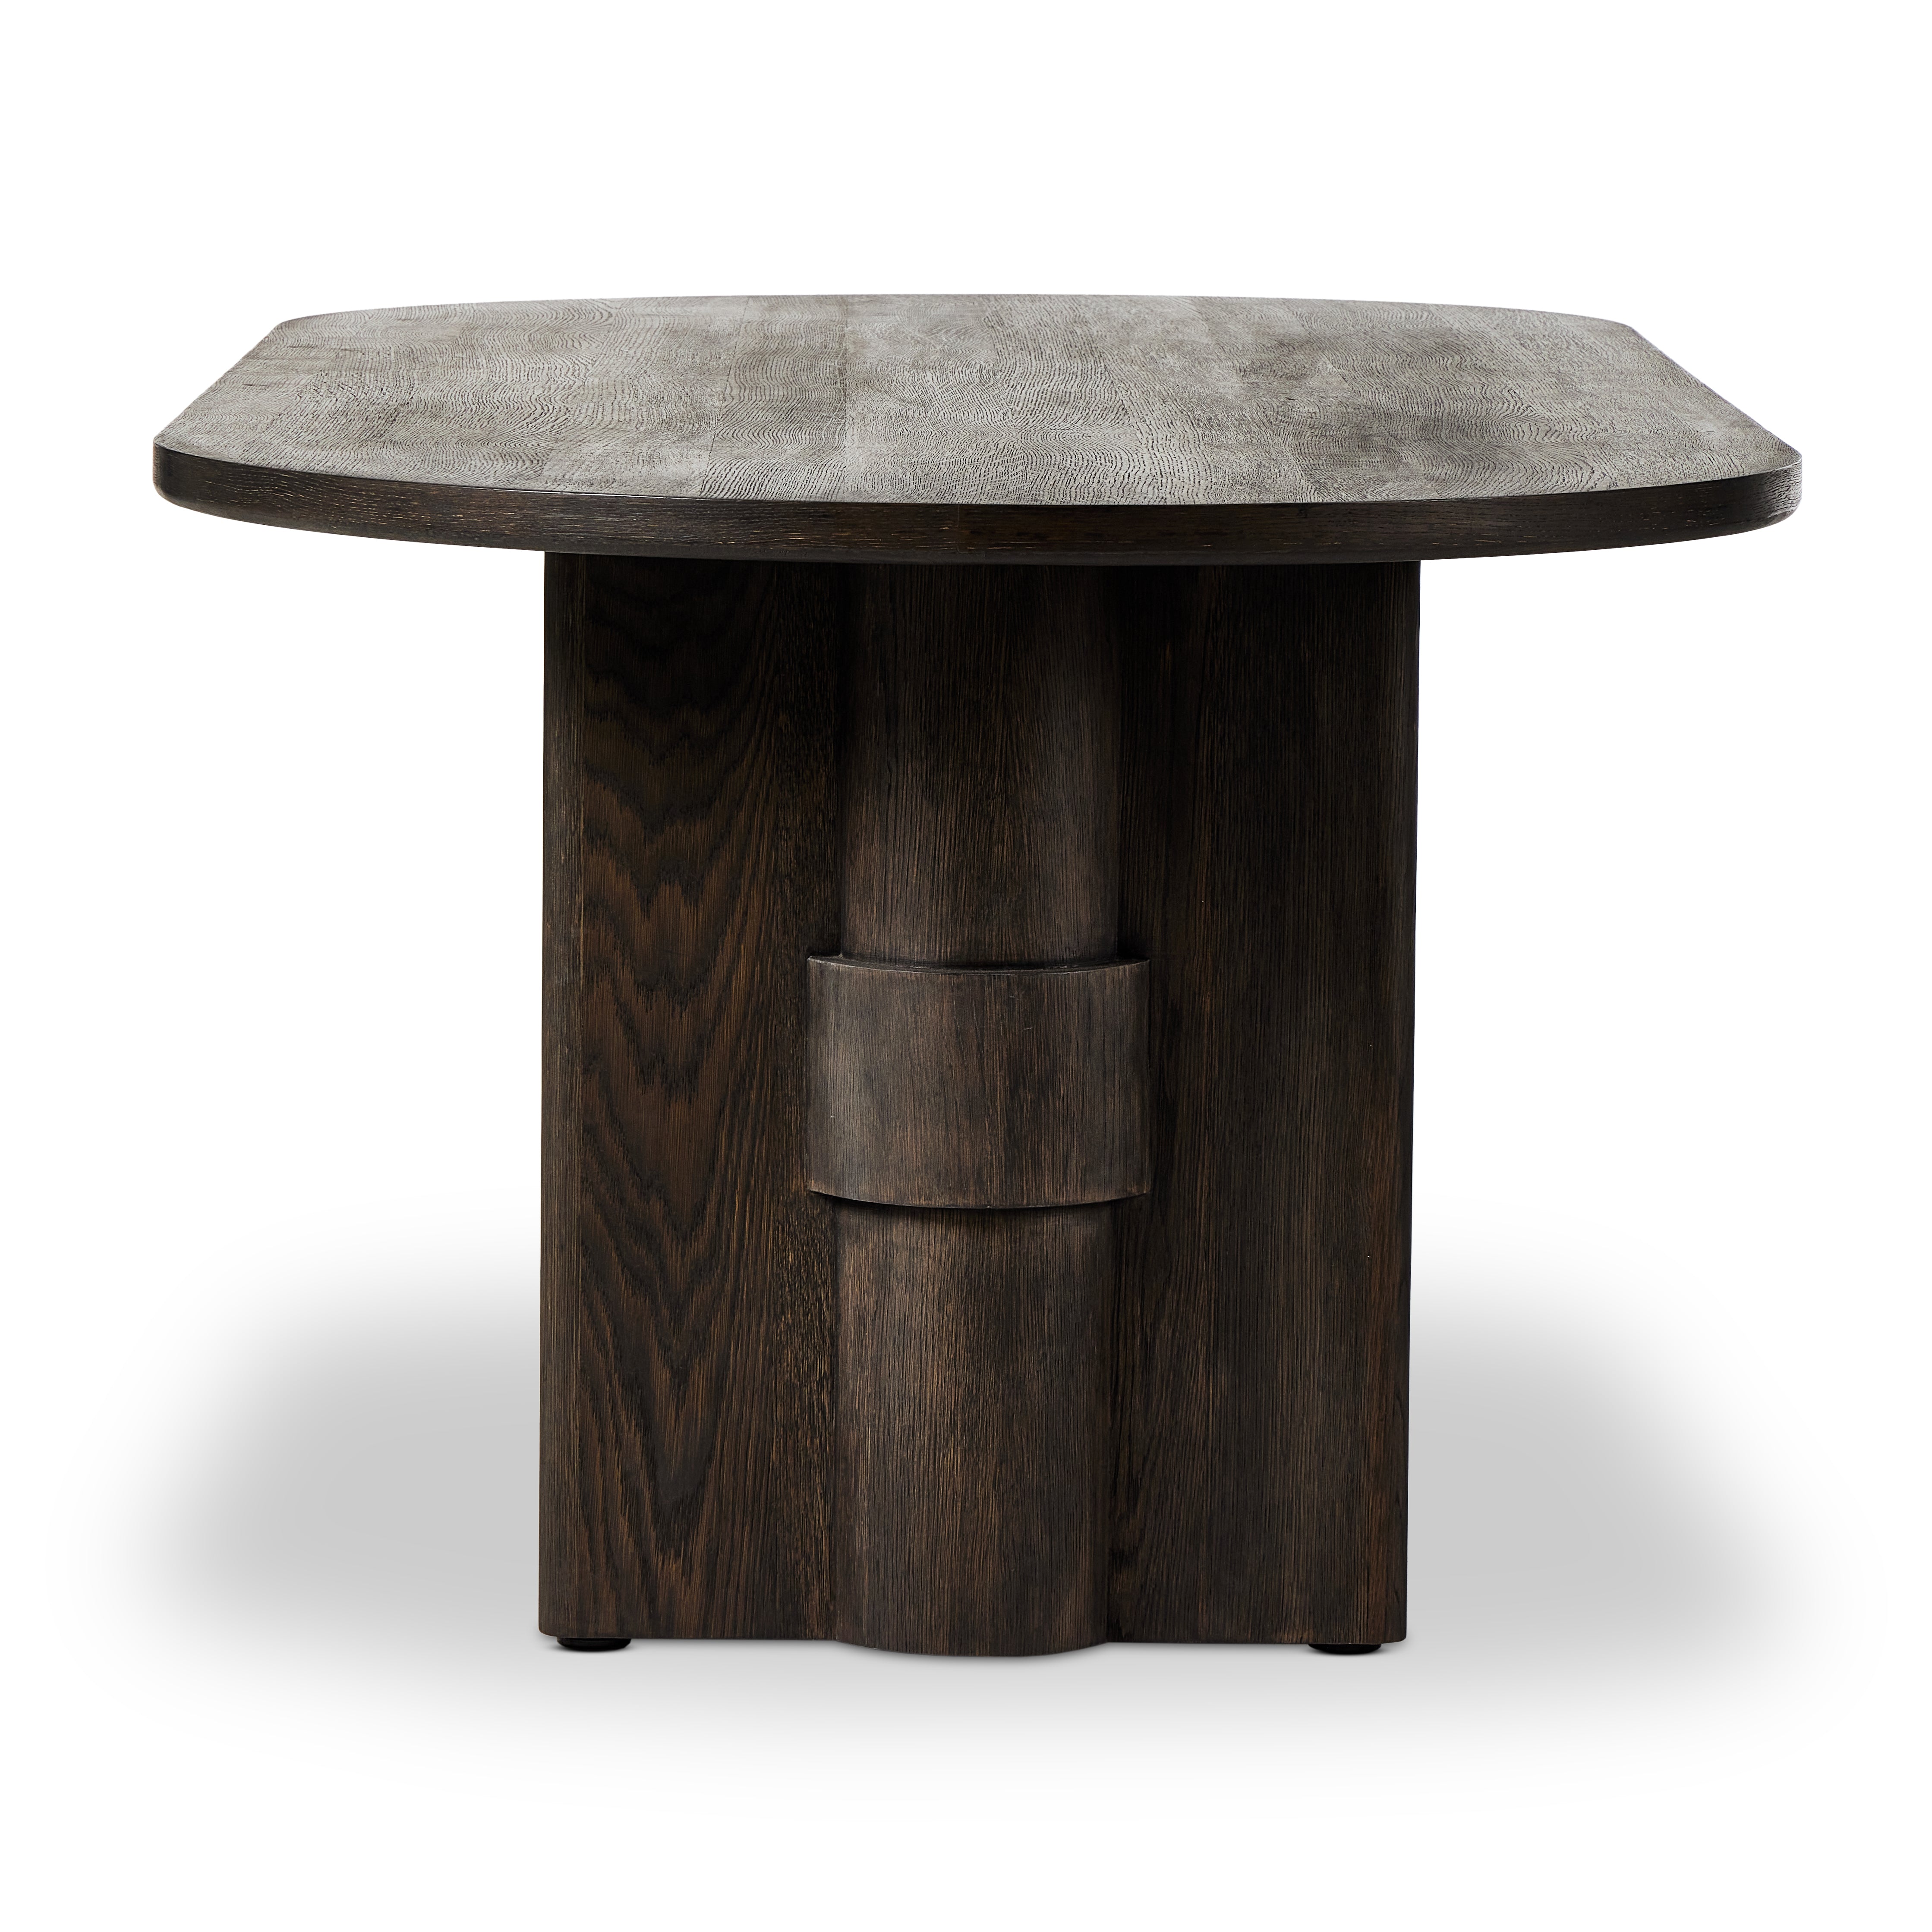 Sylvester 96" Dining Table